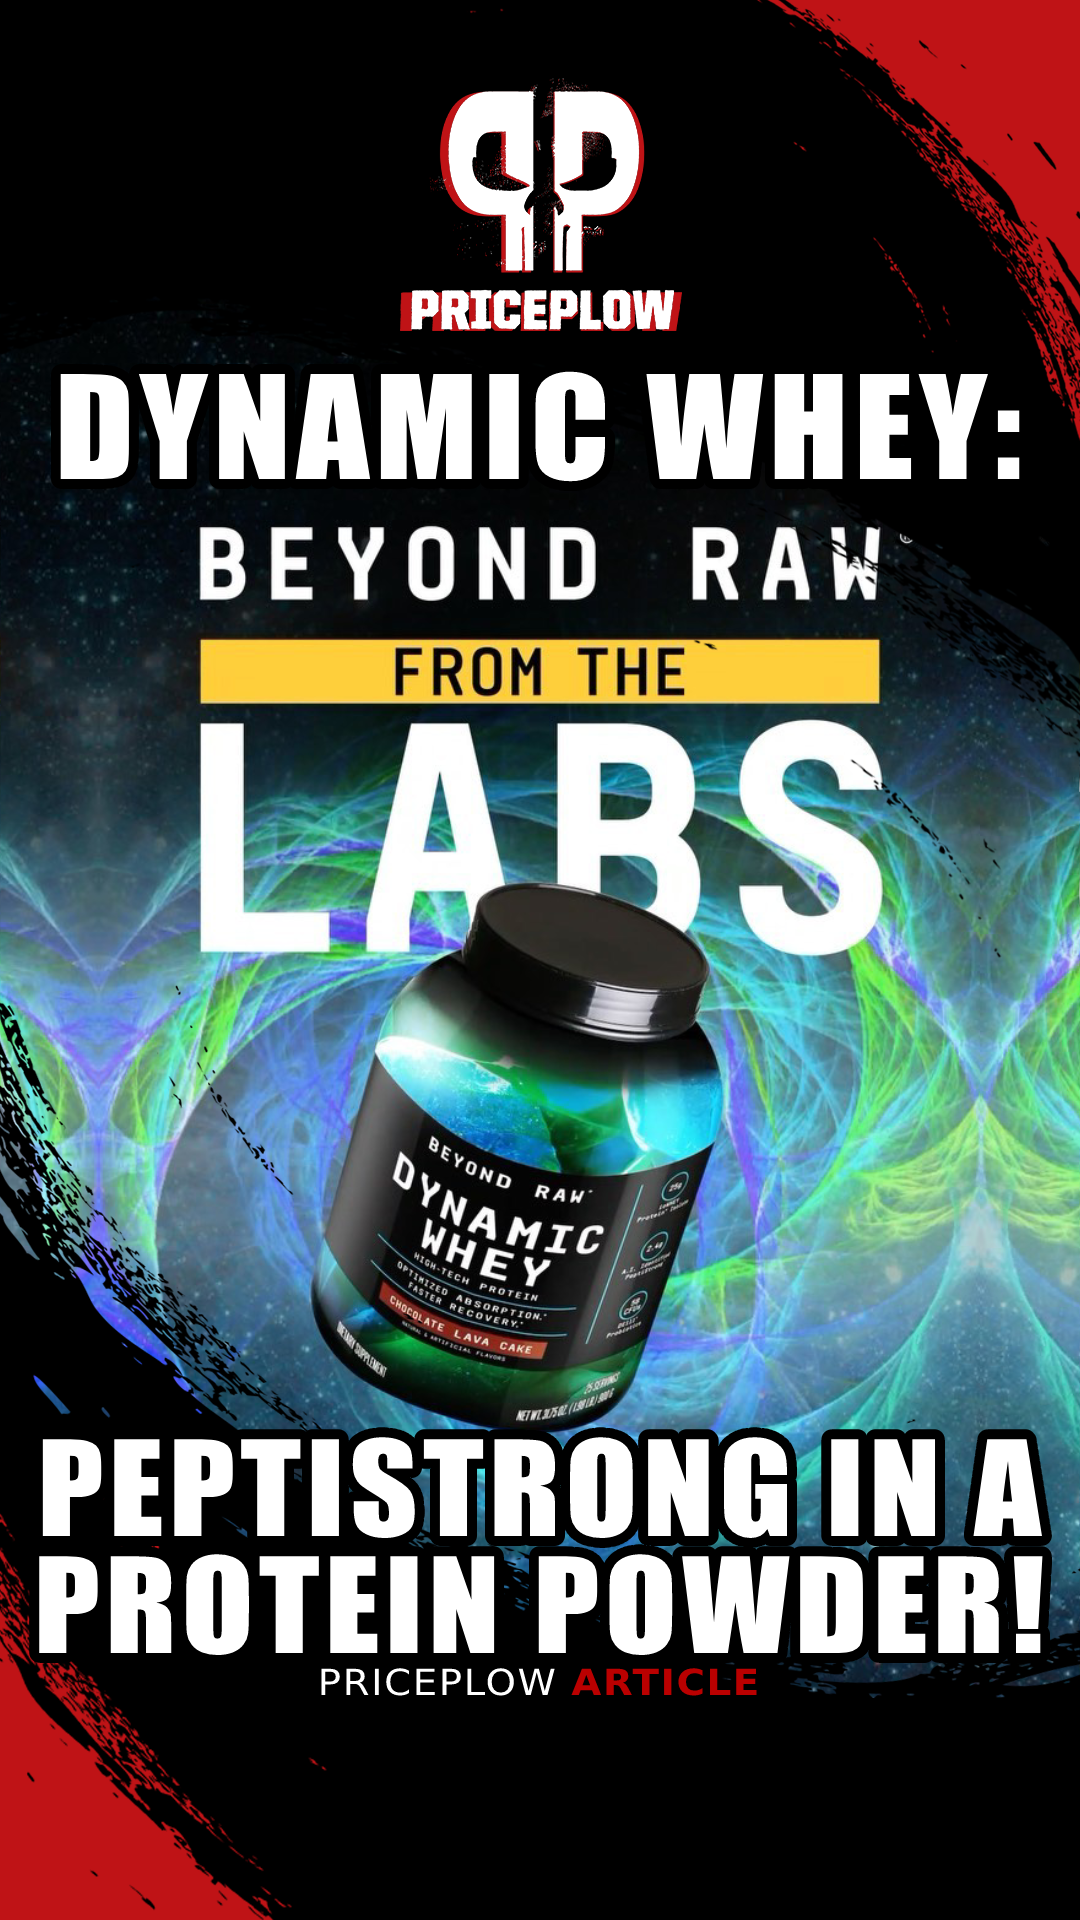 Beyond Raw Dynamic Whey with PeptiStrong